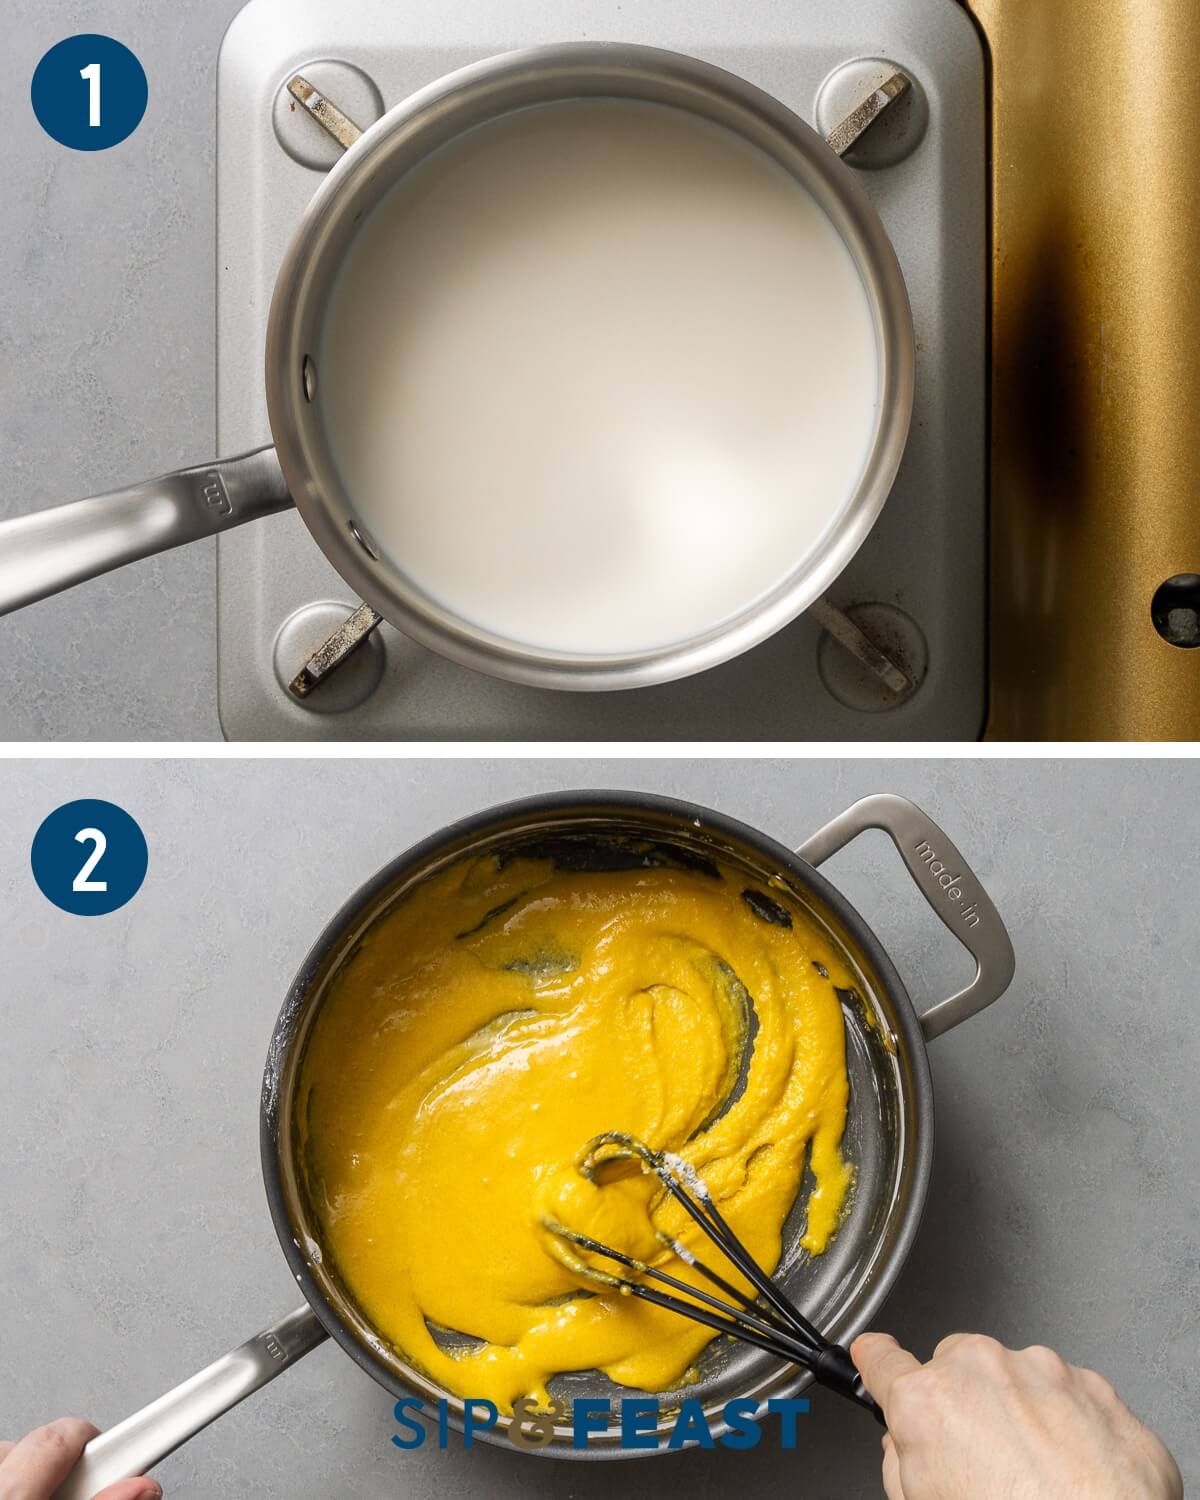 St. Joseph's Day Pastry recipe collage group one showing warming of pot of milk and whisking egg yolks and sugar in separate pan.